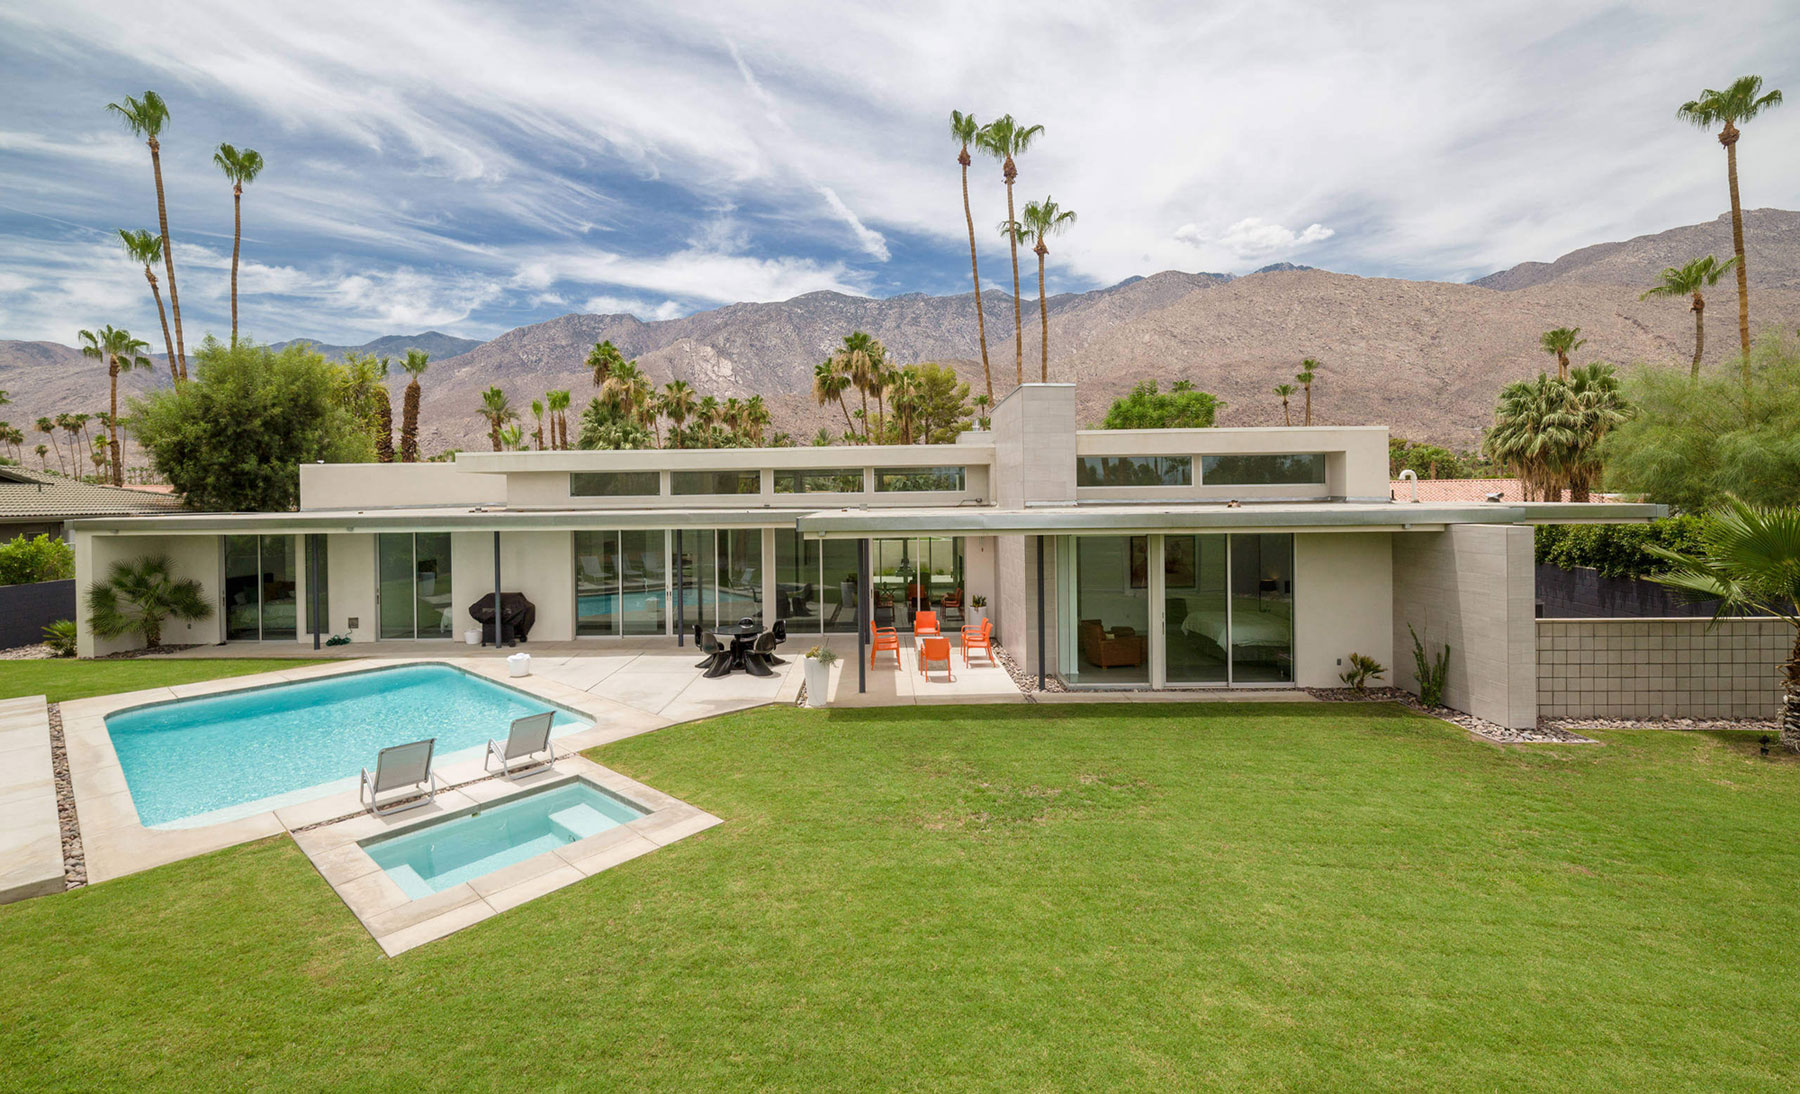 Modern Camino Real Drive Home in Palm Springs by OJMR-Architects-02